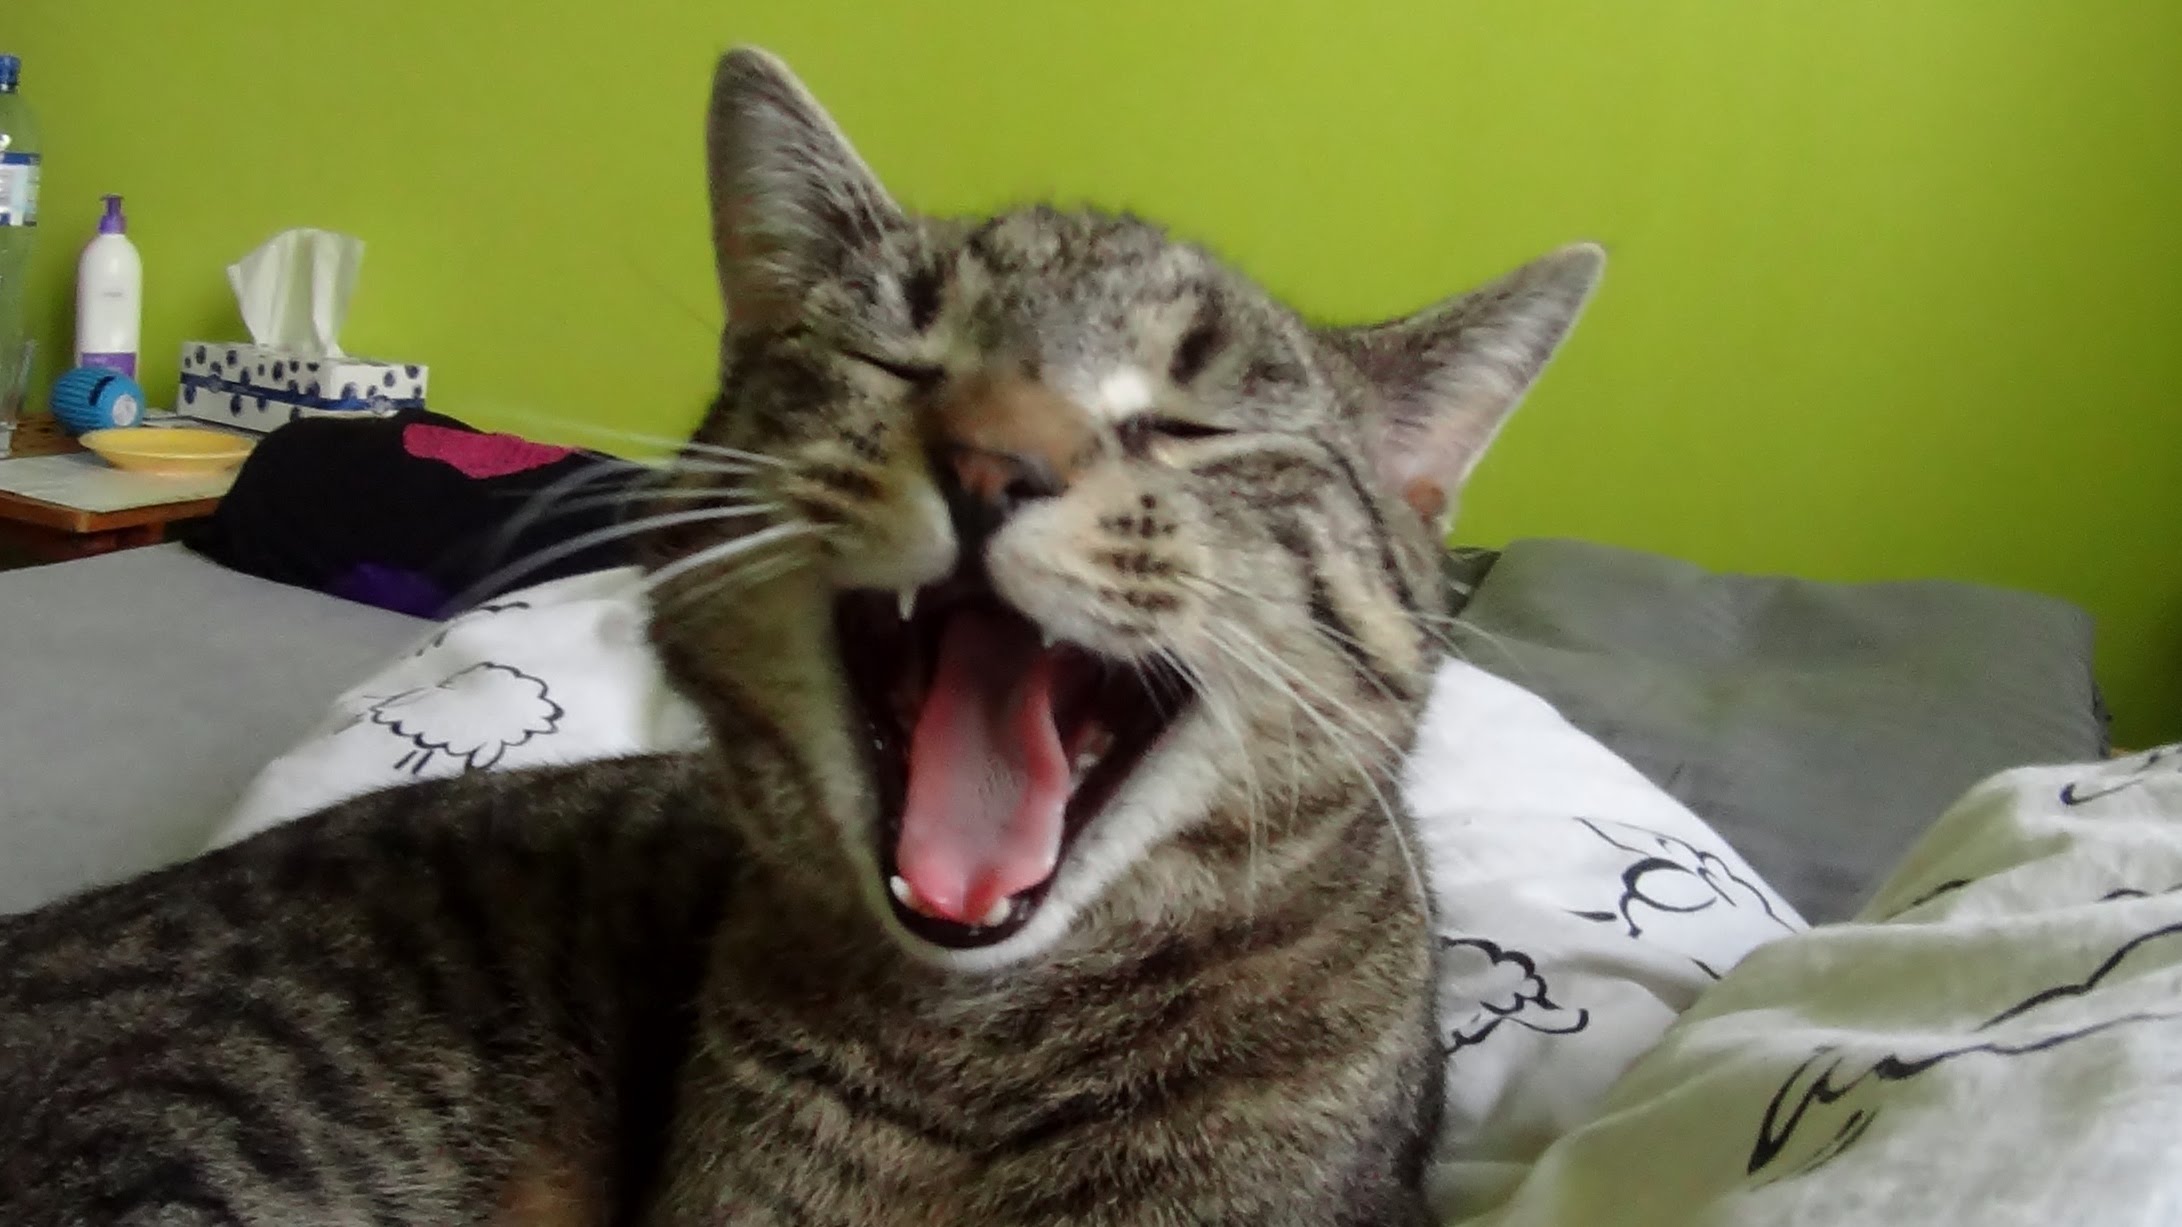 Cat yawns in slow motion(120fps) - compilation - YouTube